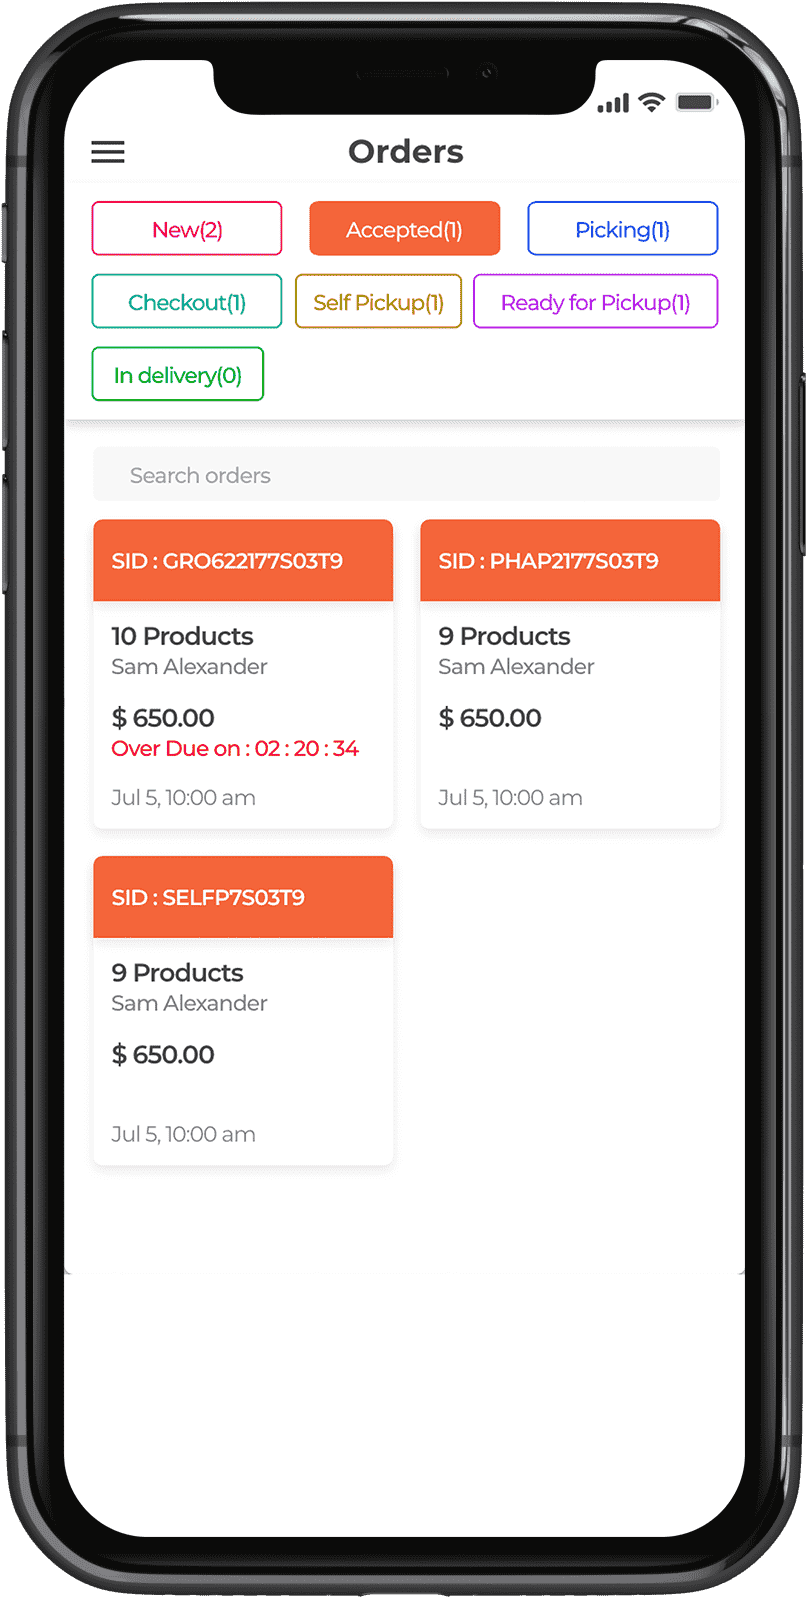 accepted-order-tab-in-grocery-delivery-picker-app.png